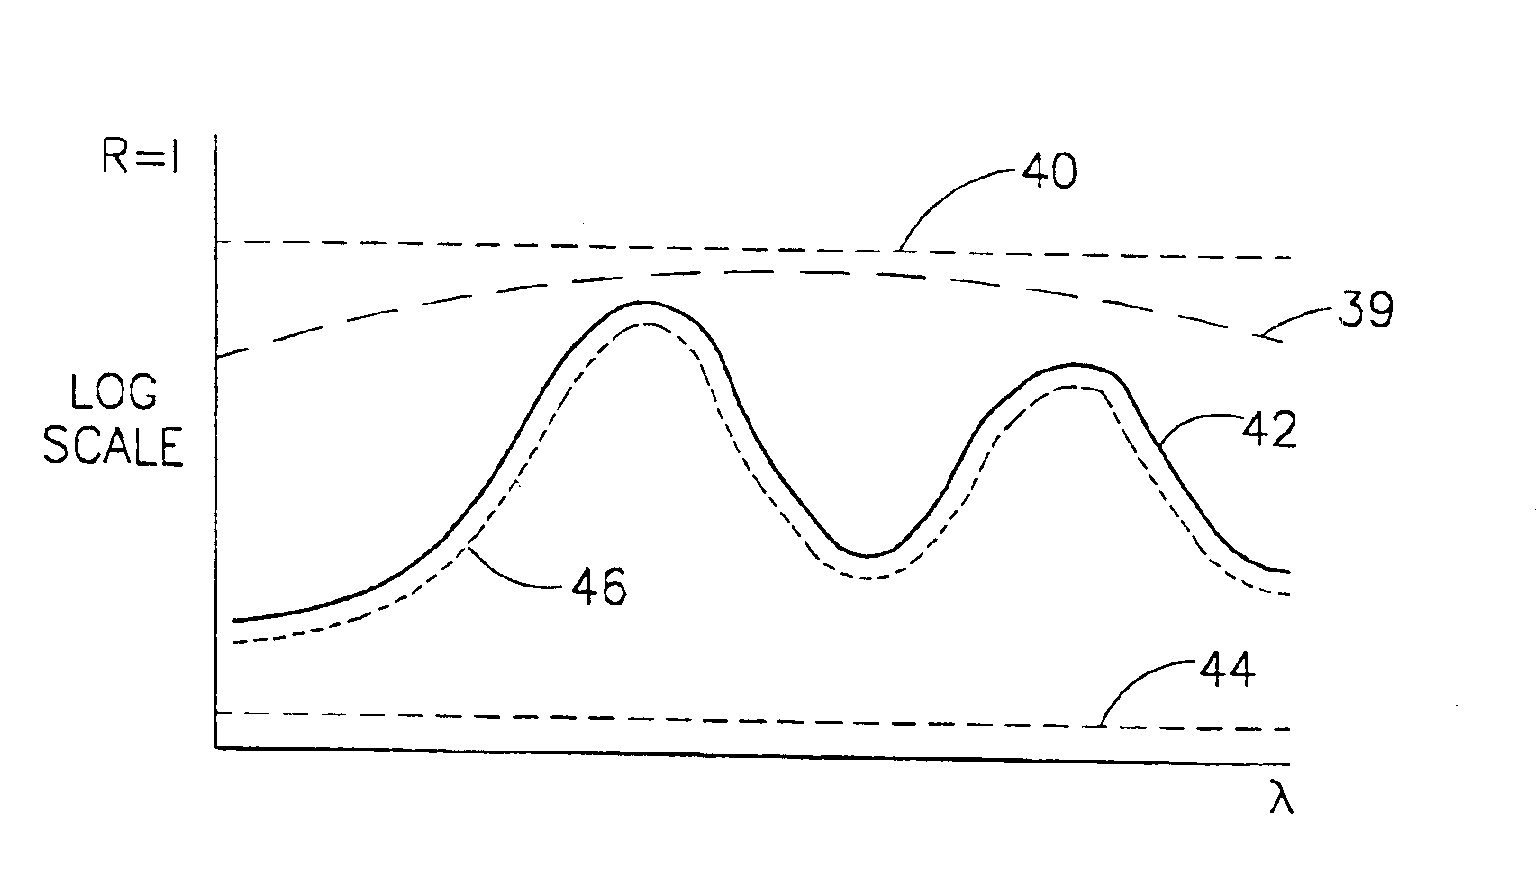 System and method for accurately reproducing color